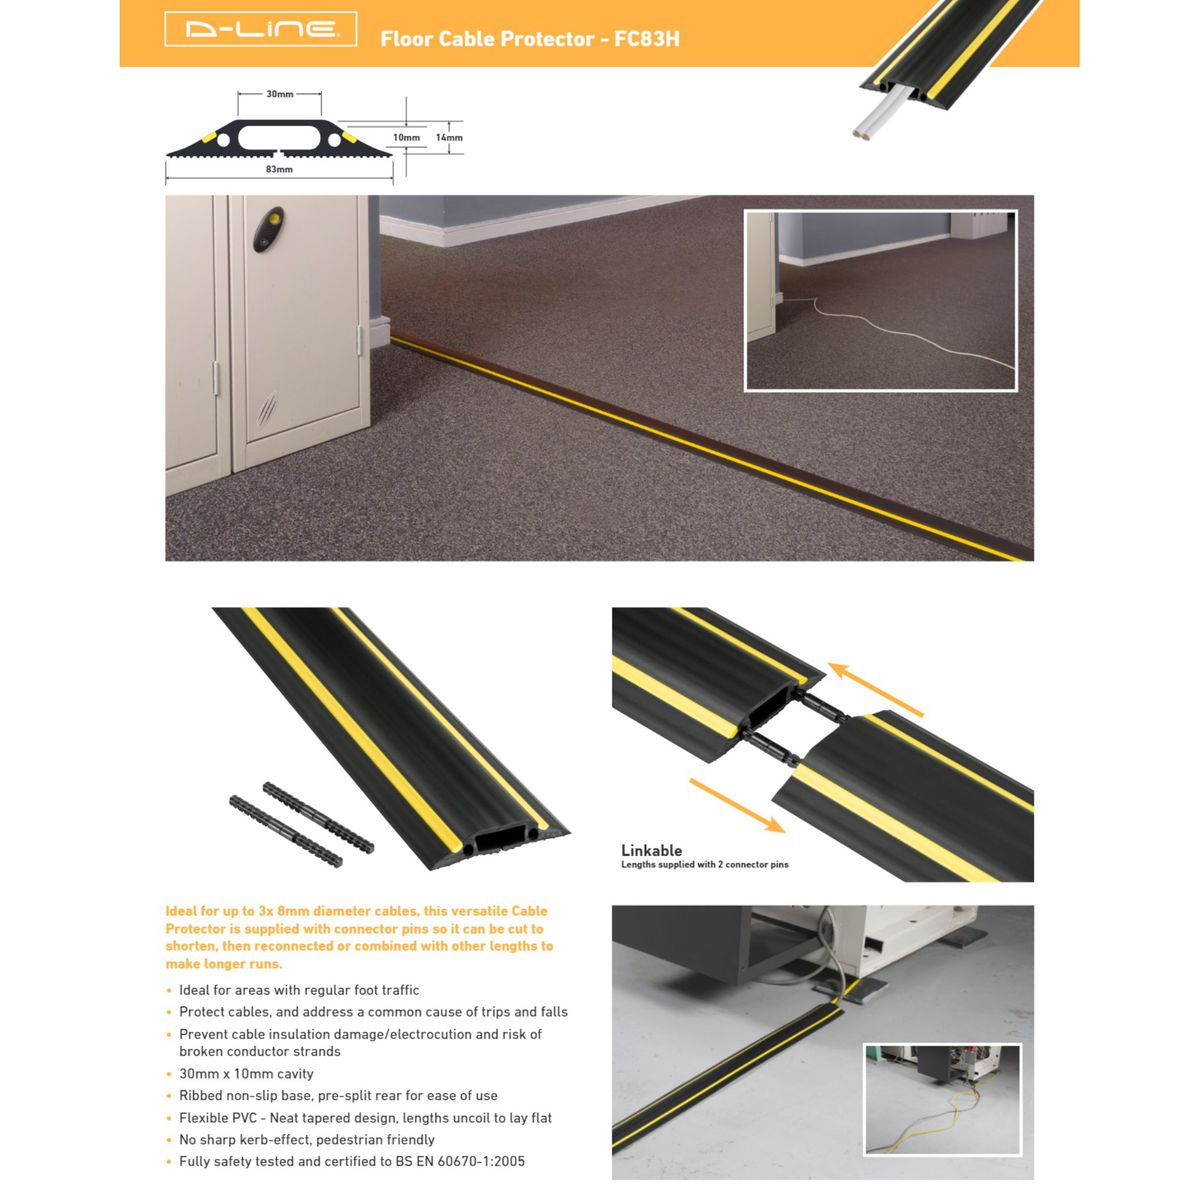 D-Line Heavy Duty Floor Cable Cover Yellow Stripe 1.8m (30mm x 10mm Cavity)